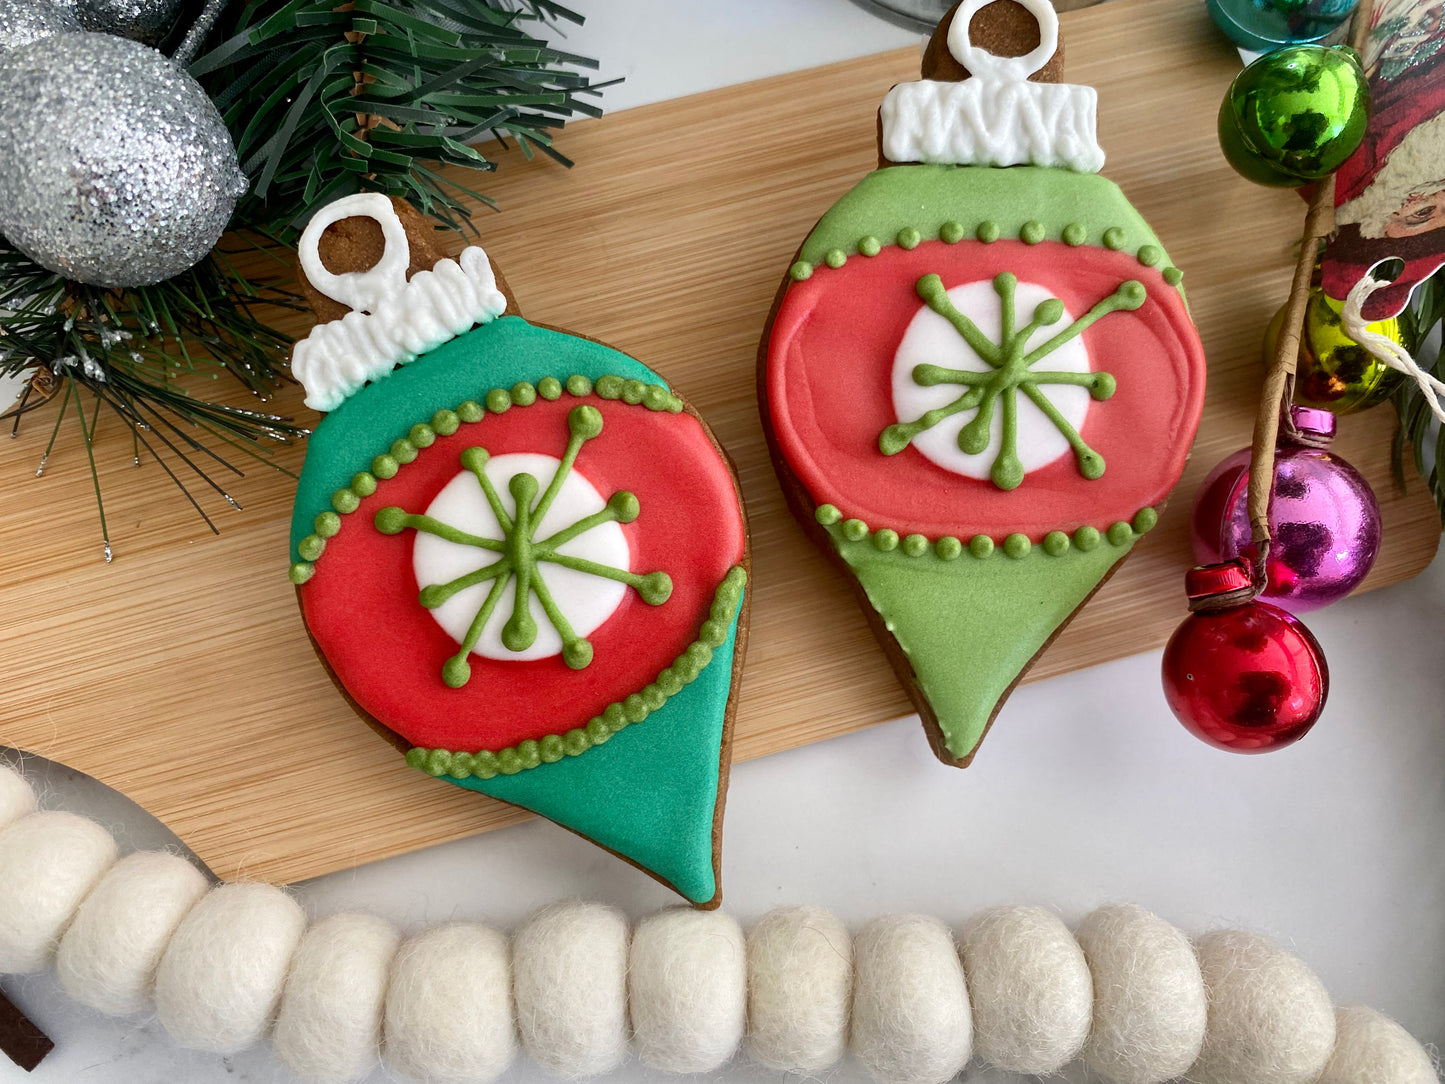 Vintage style ornaments